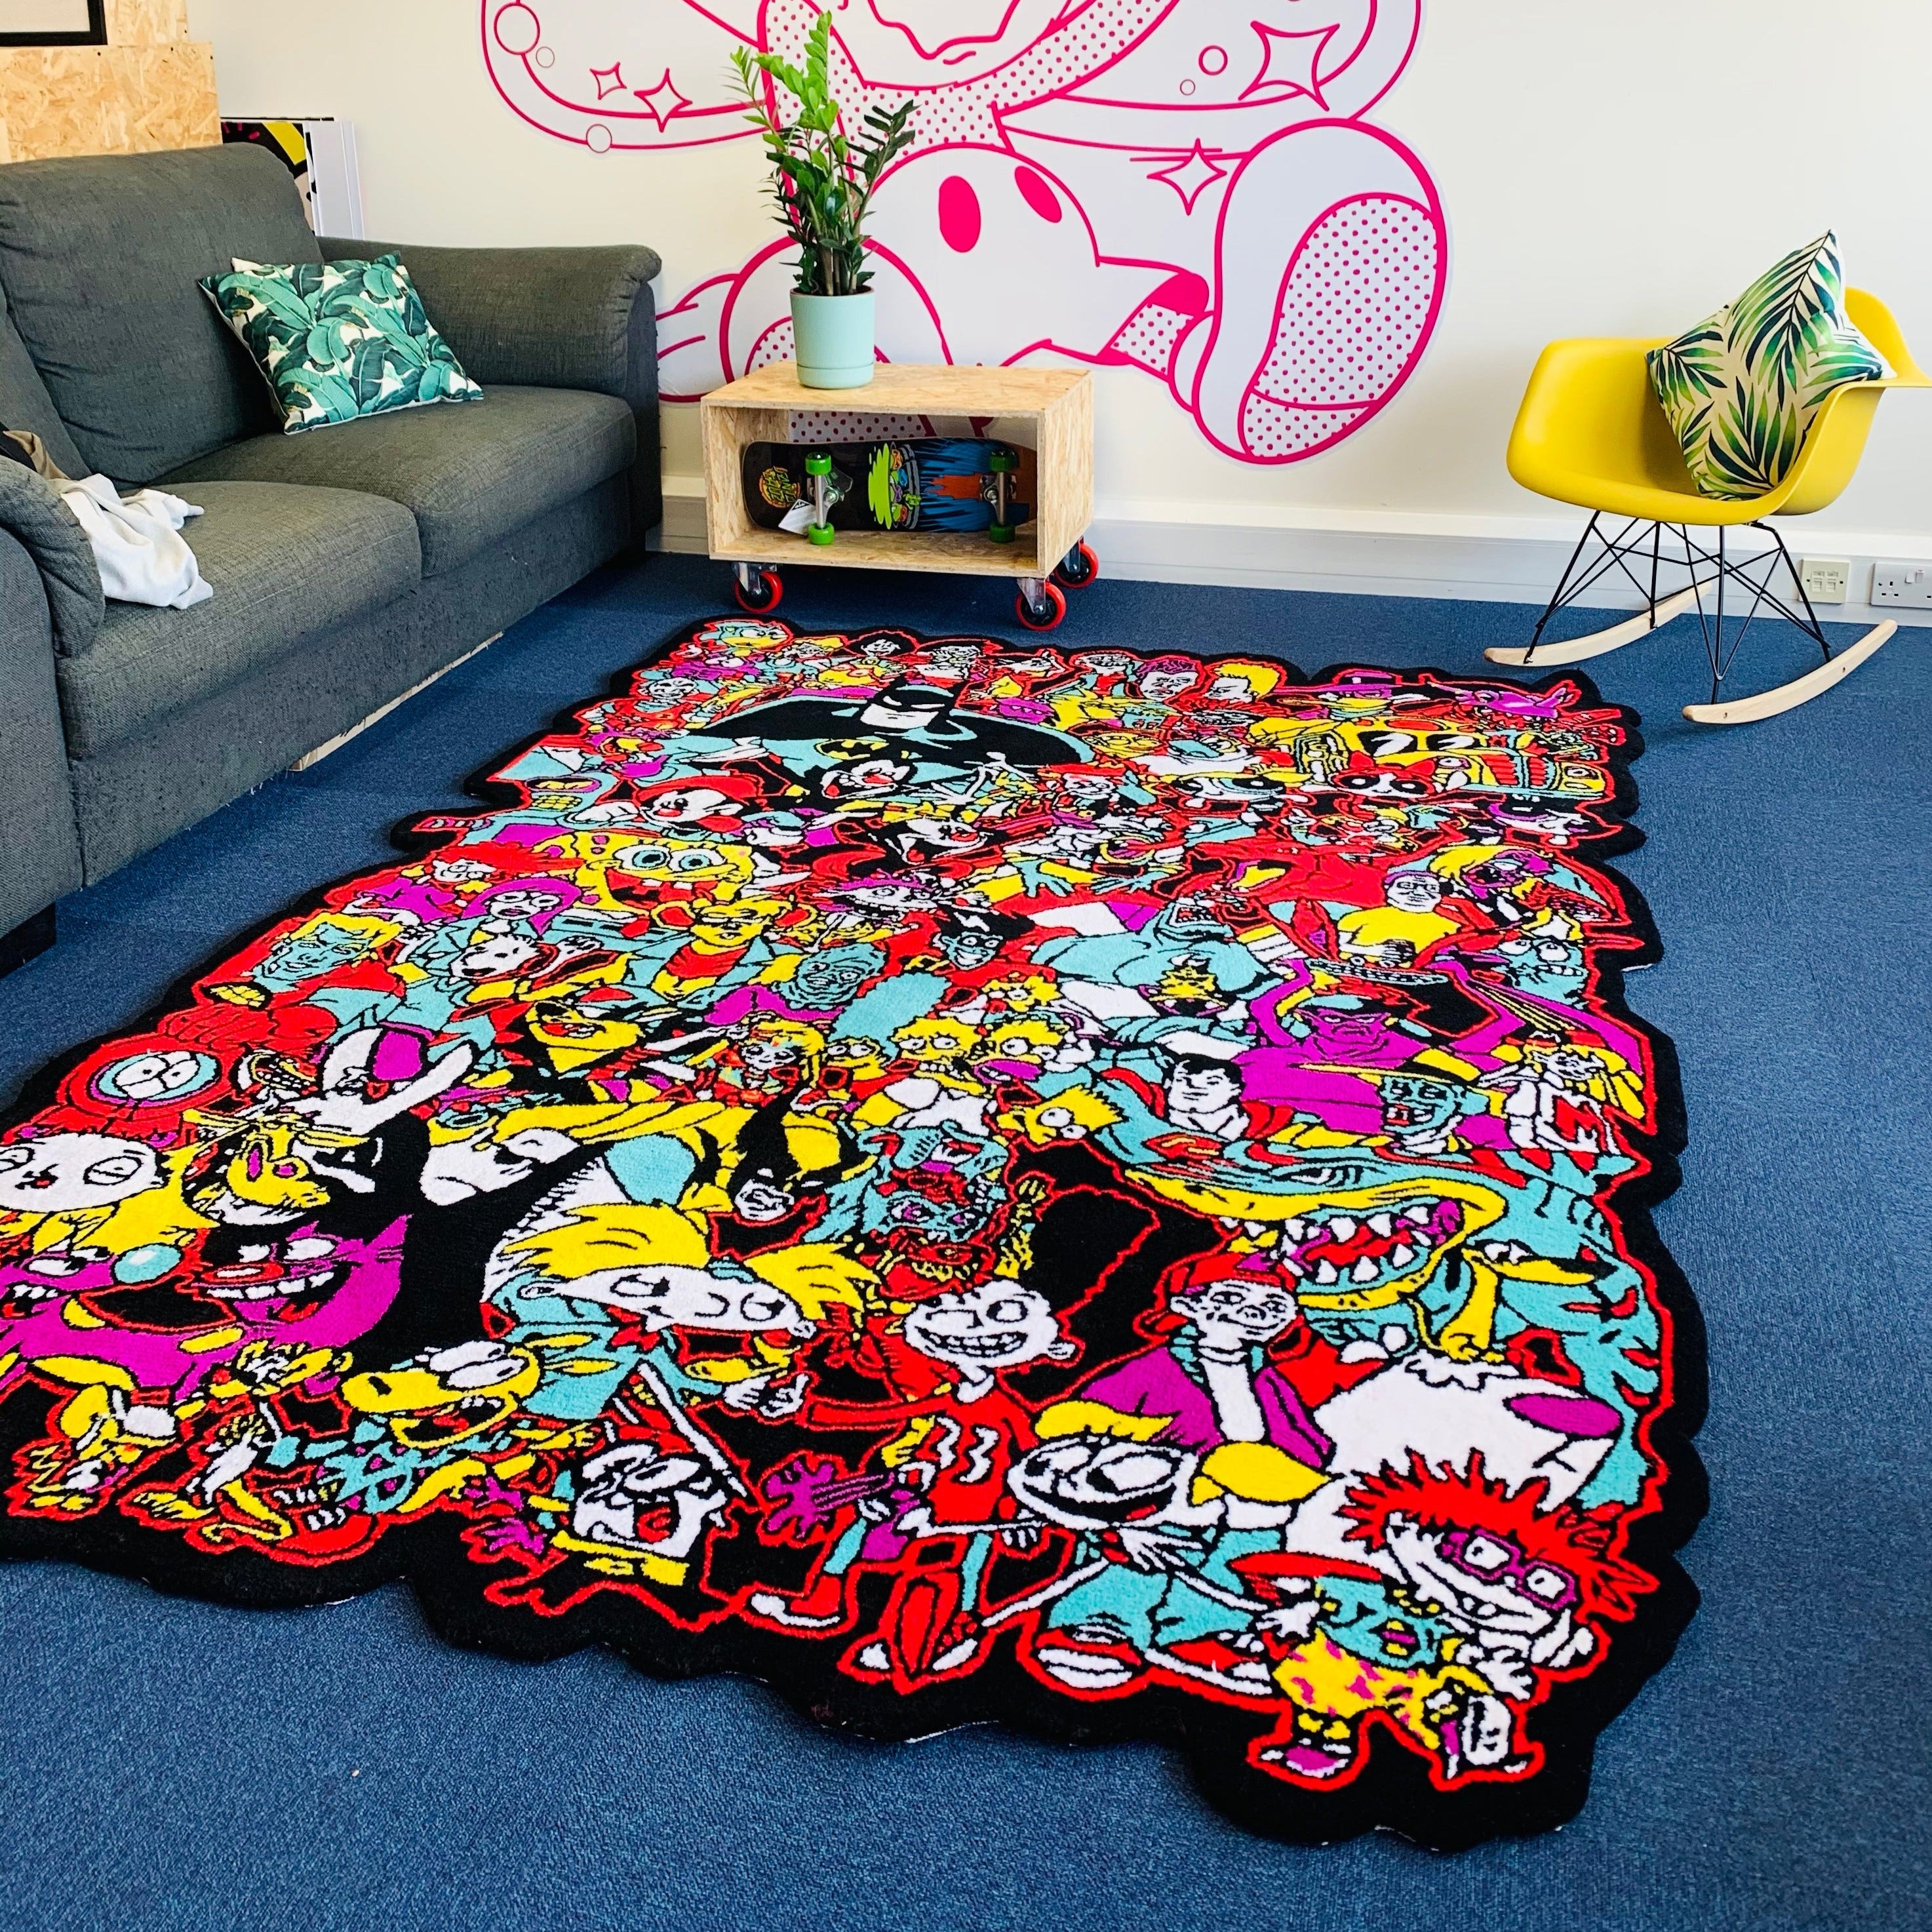 Made in the 90s Limited Edition Handmade Rug